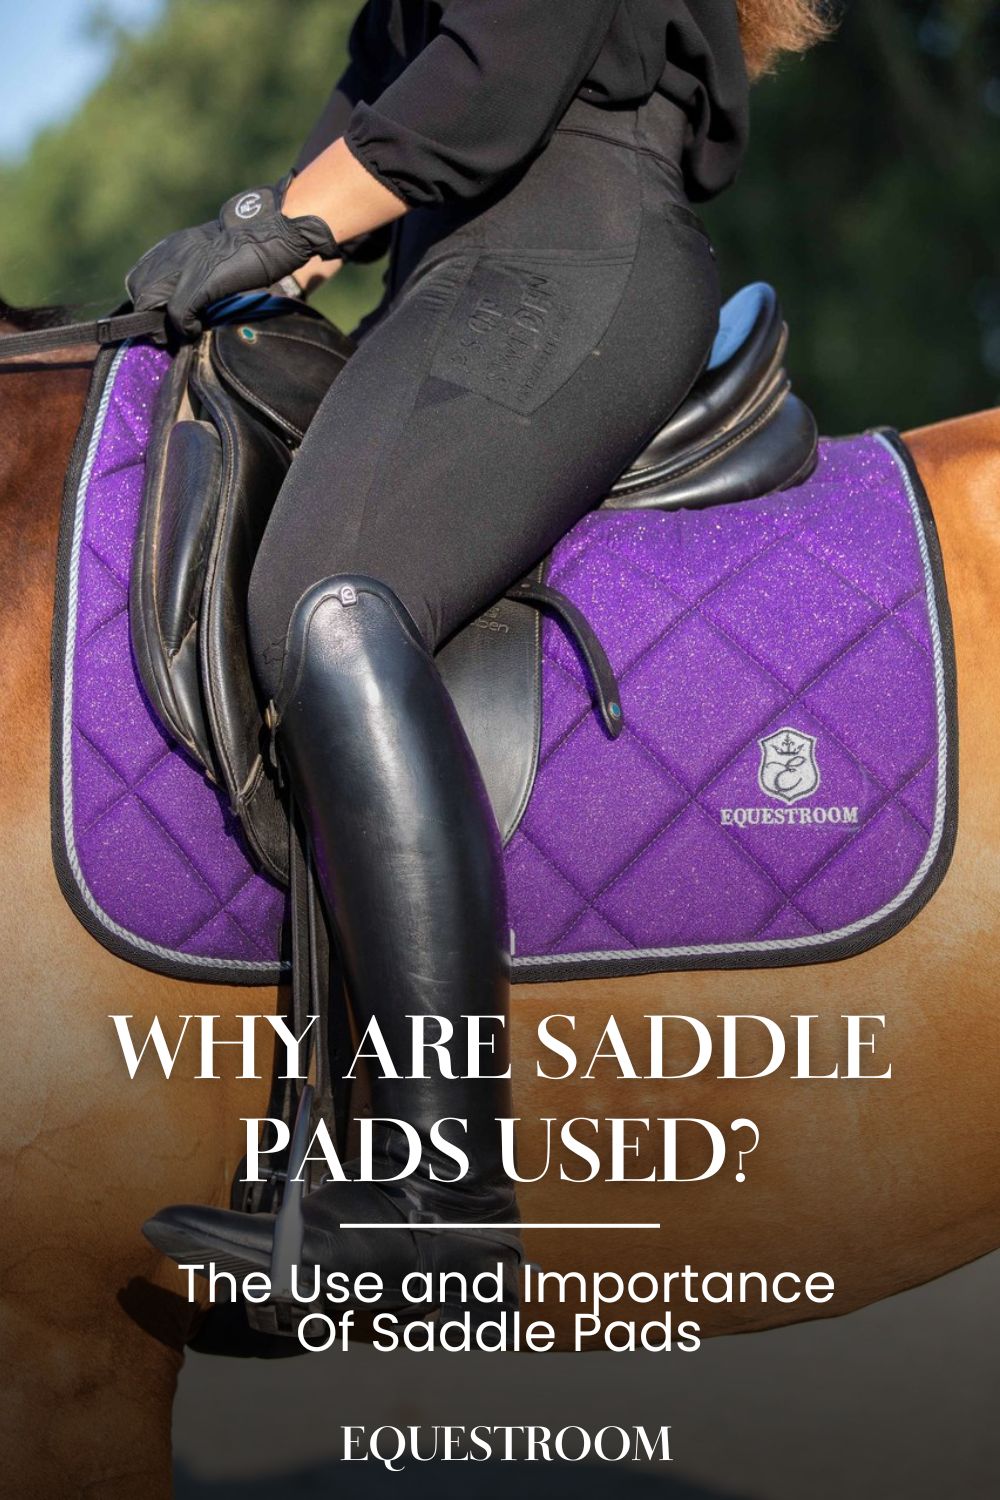 Why Are Saddle Pads Used?